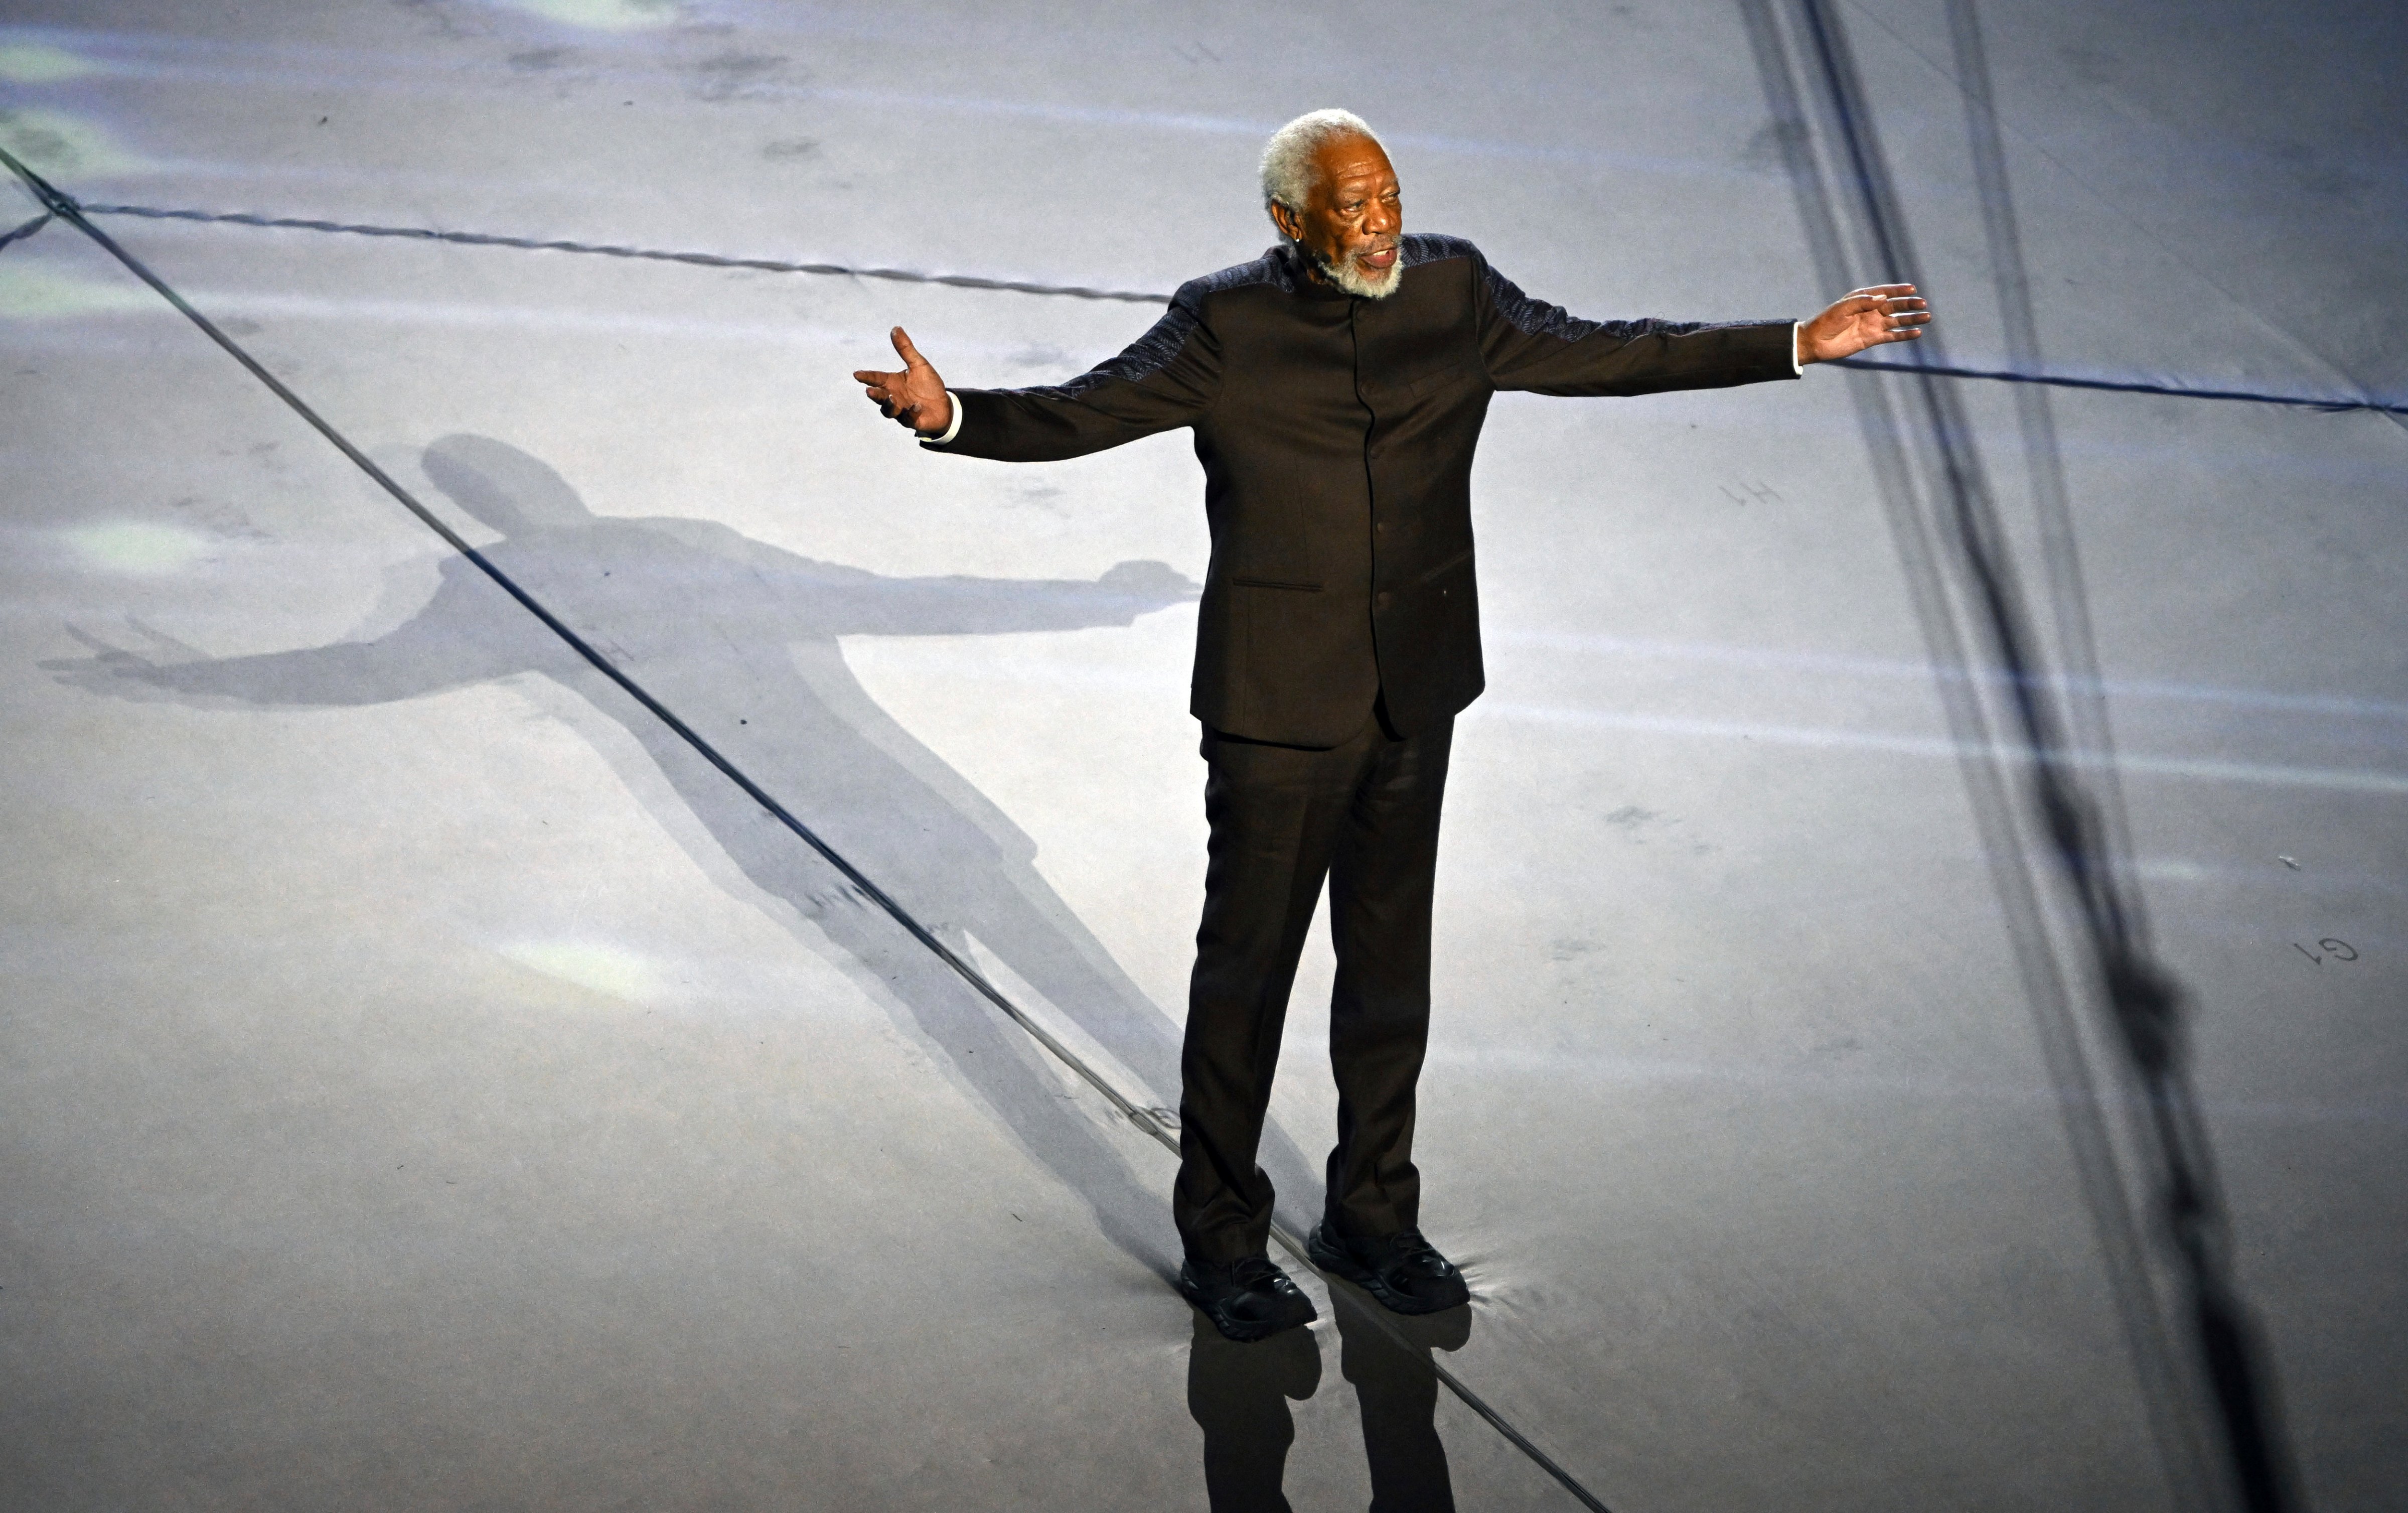 Hollywood actor Morgan Freeman performs during the opening ceremony of the World Cup in Qatar, November 20, 2022 (Robert Michael—picture-alliance/dpa/AP Images)